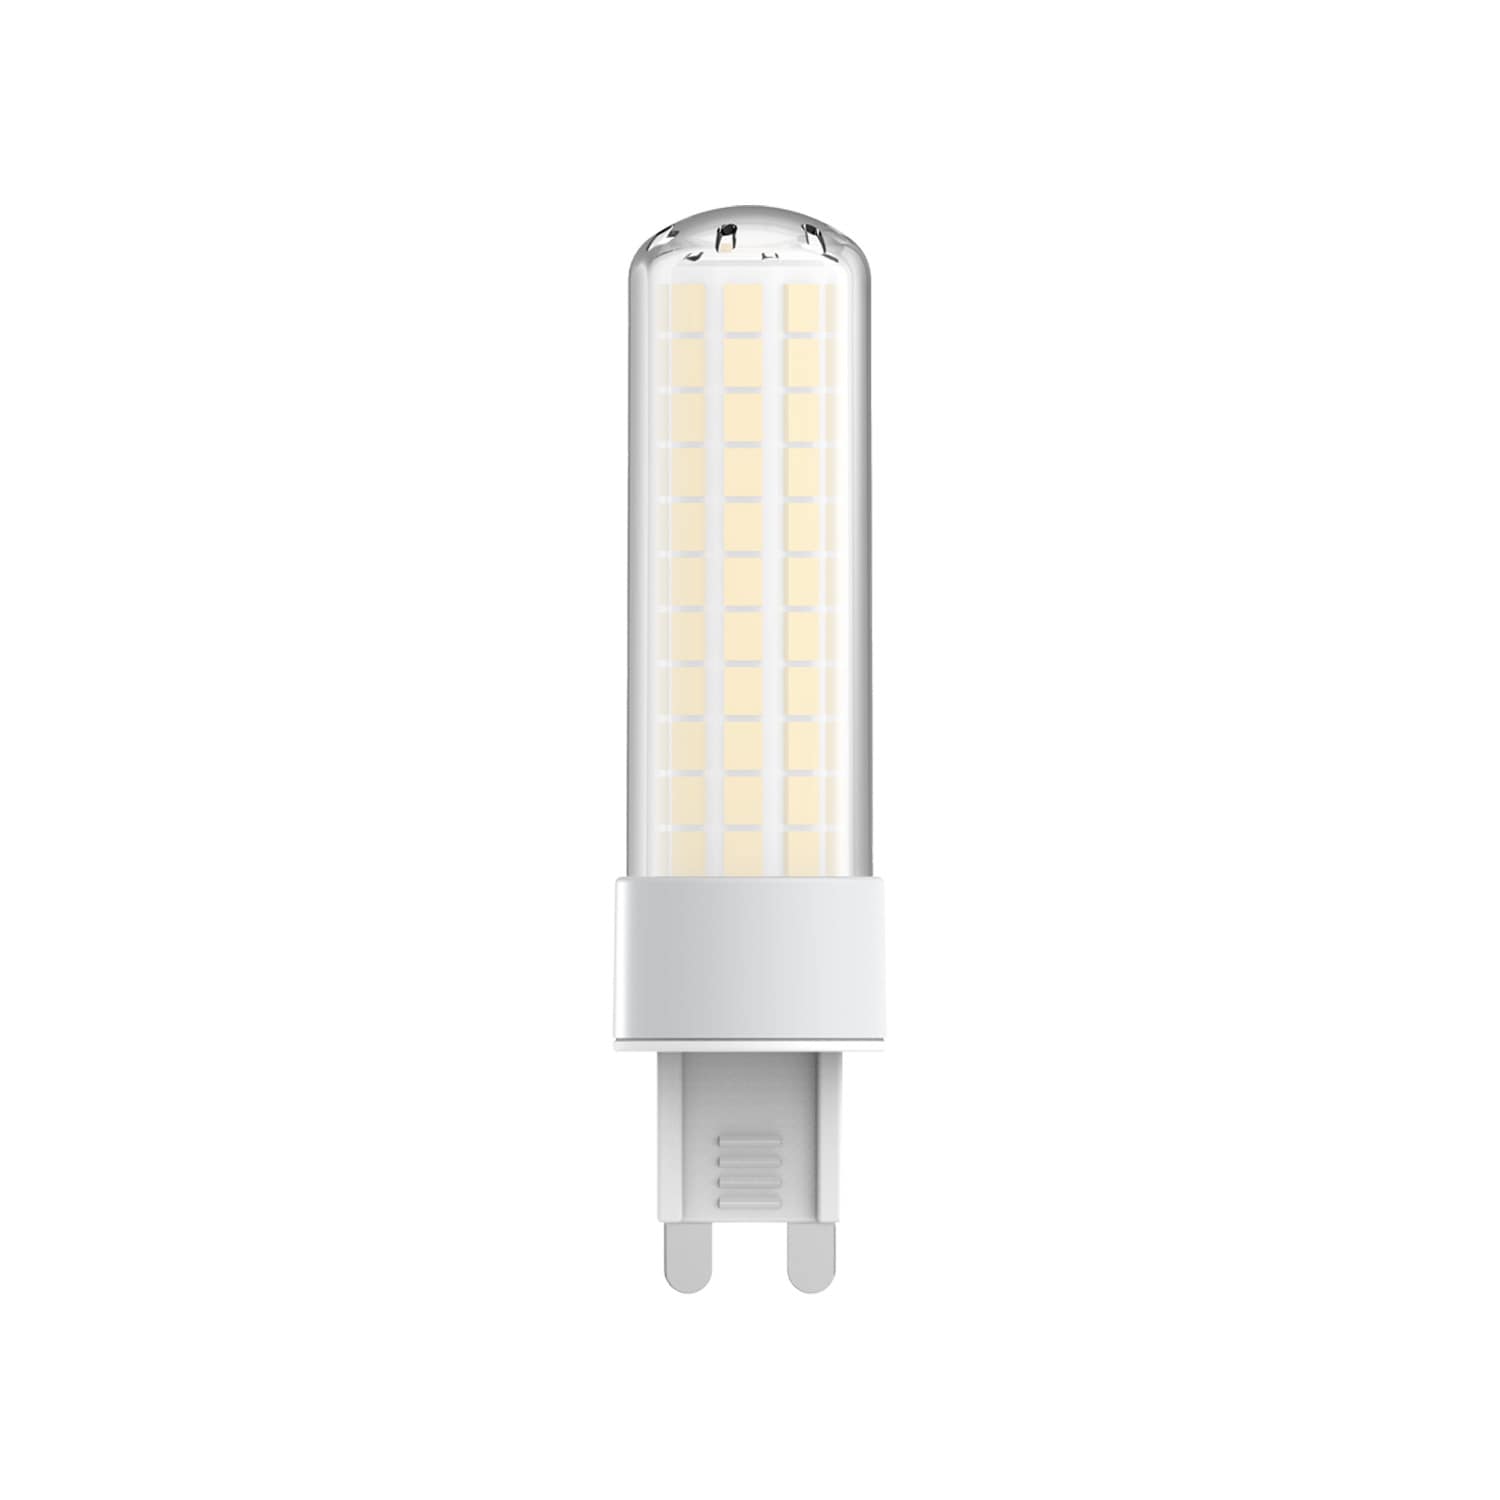 Goodlite 2W LED G9 Dimmable, 220 Lumens 30W, 300 Beam Angle 120v